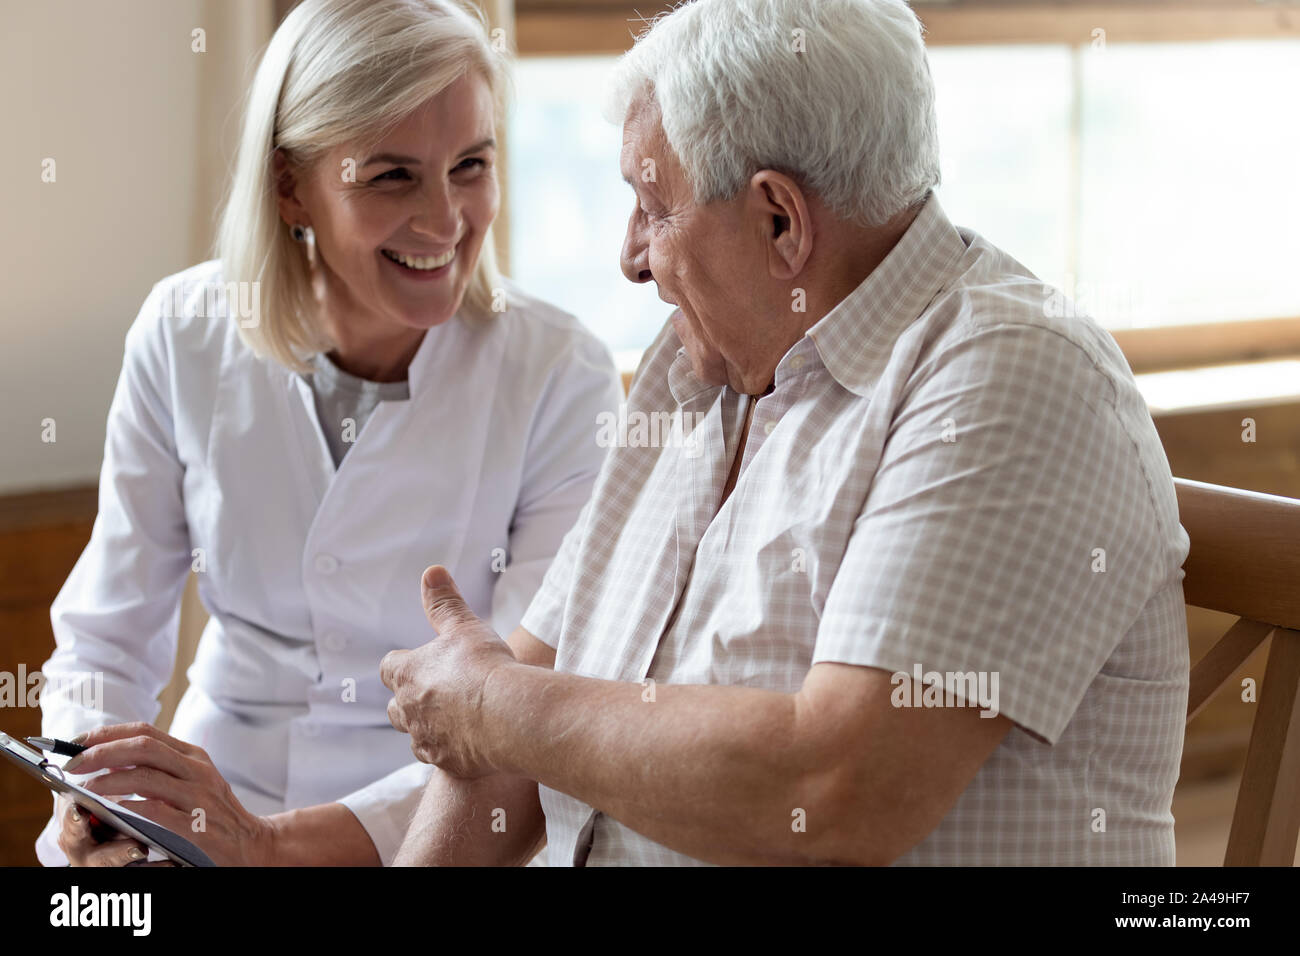 Elderly man patient and middle-aged nurse talking indoors Stock Photo